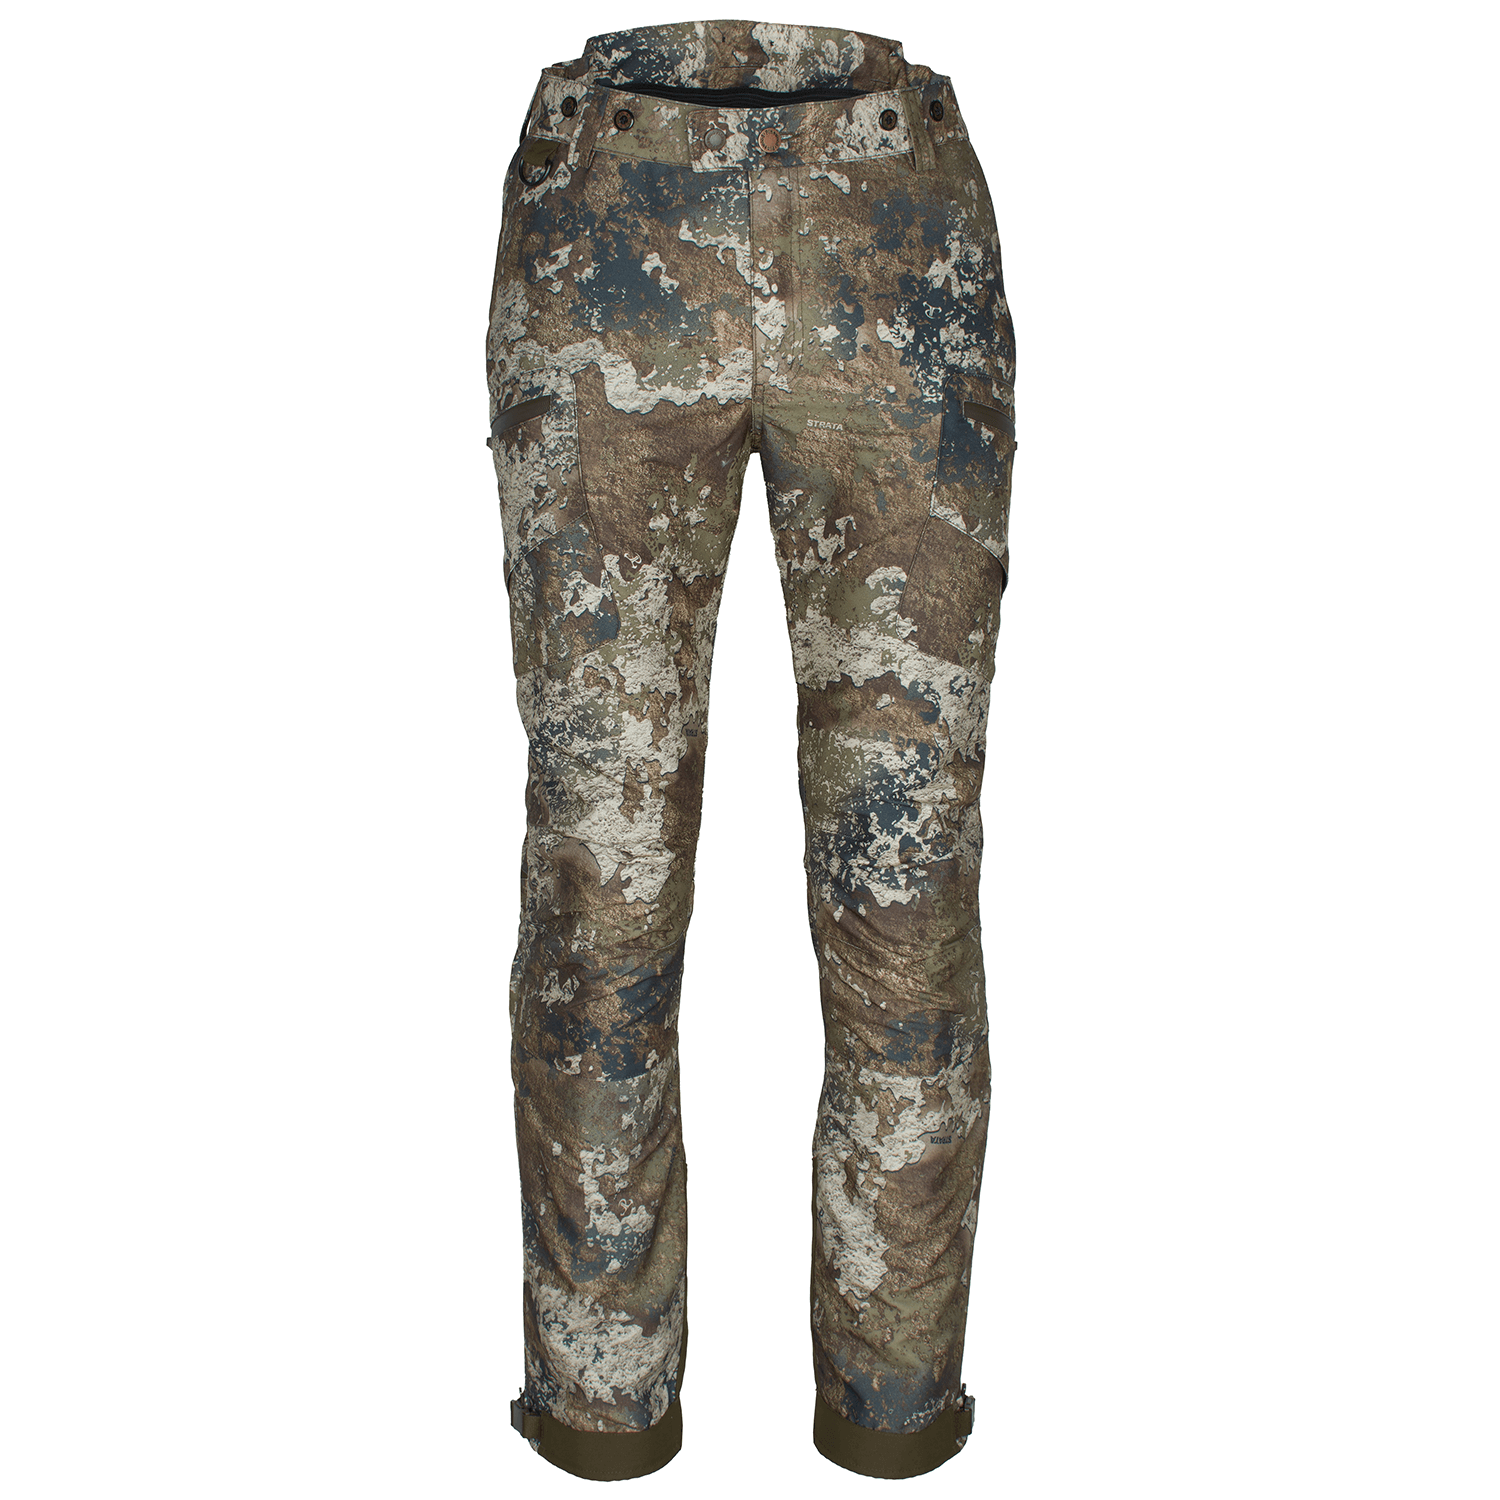 Pinewood Trousers Hunter Pro Xtreme 2.0 Camo (Strata) - Hunting Trousers